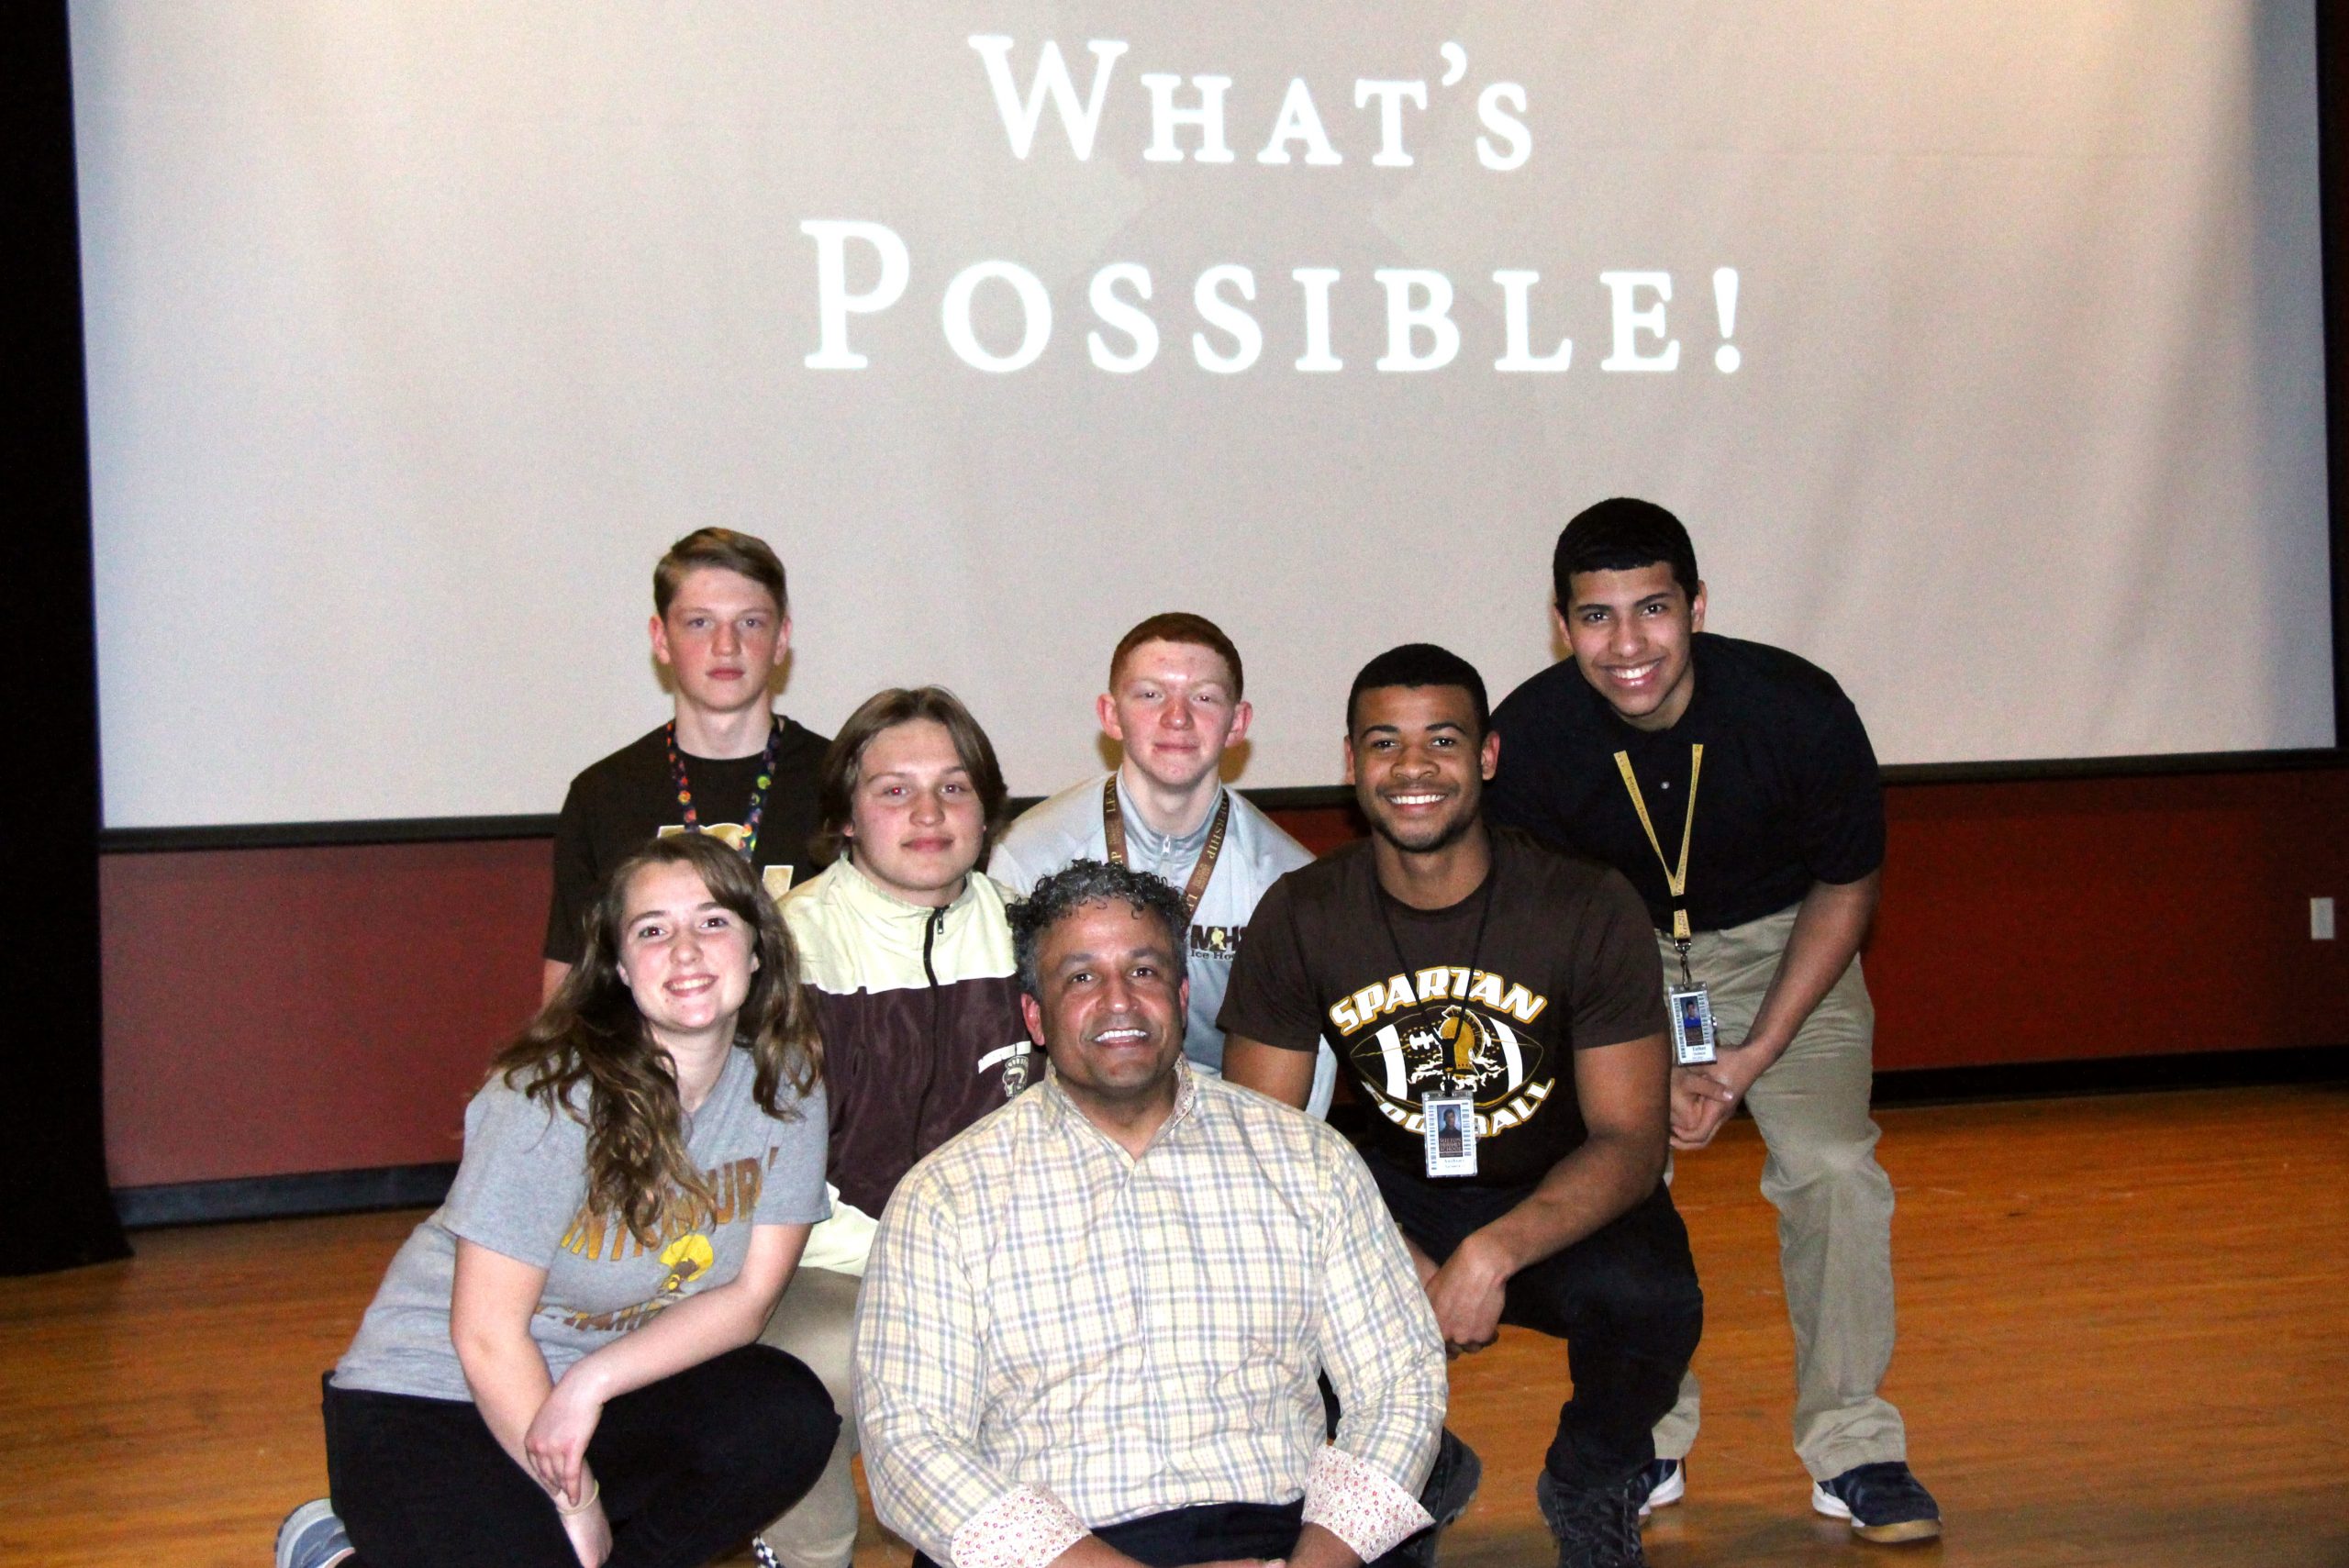 Author JT McCormick poses for a group photo with Milton Hershey School students during a recent visit to the school.